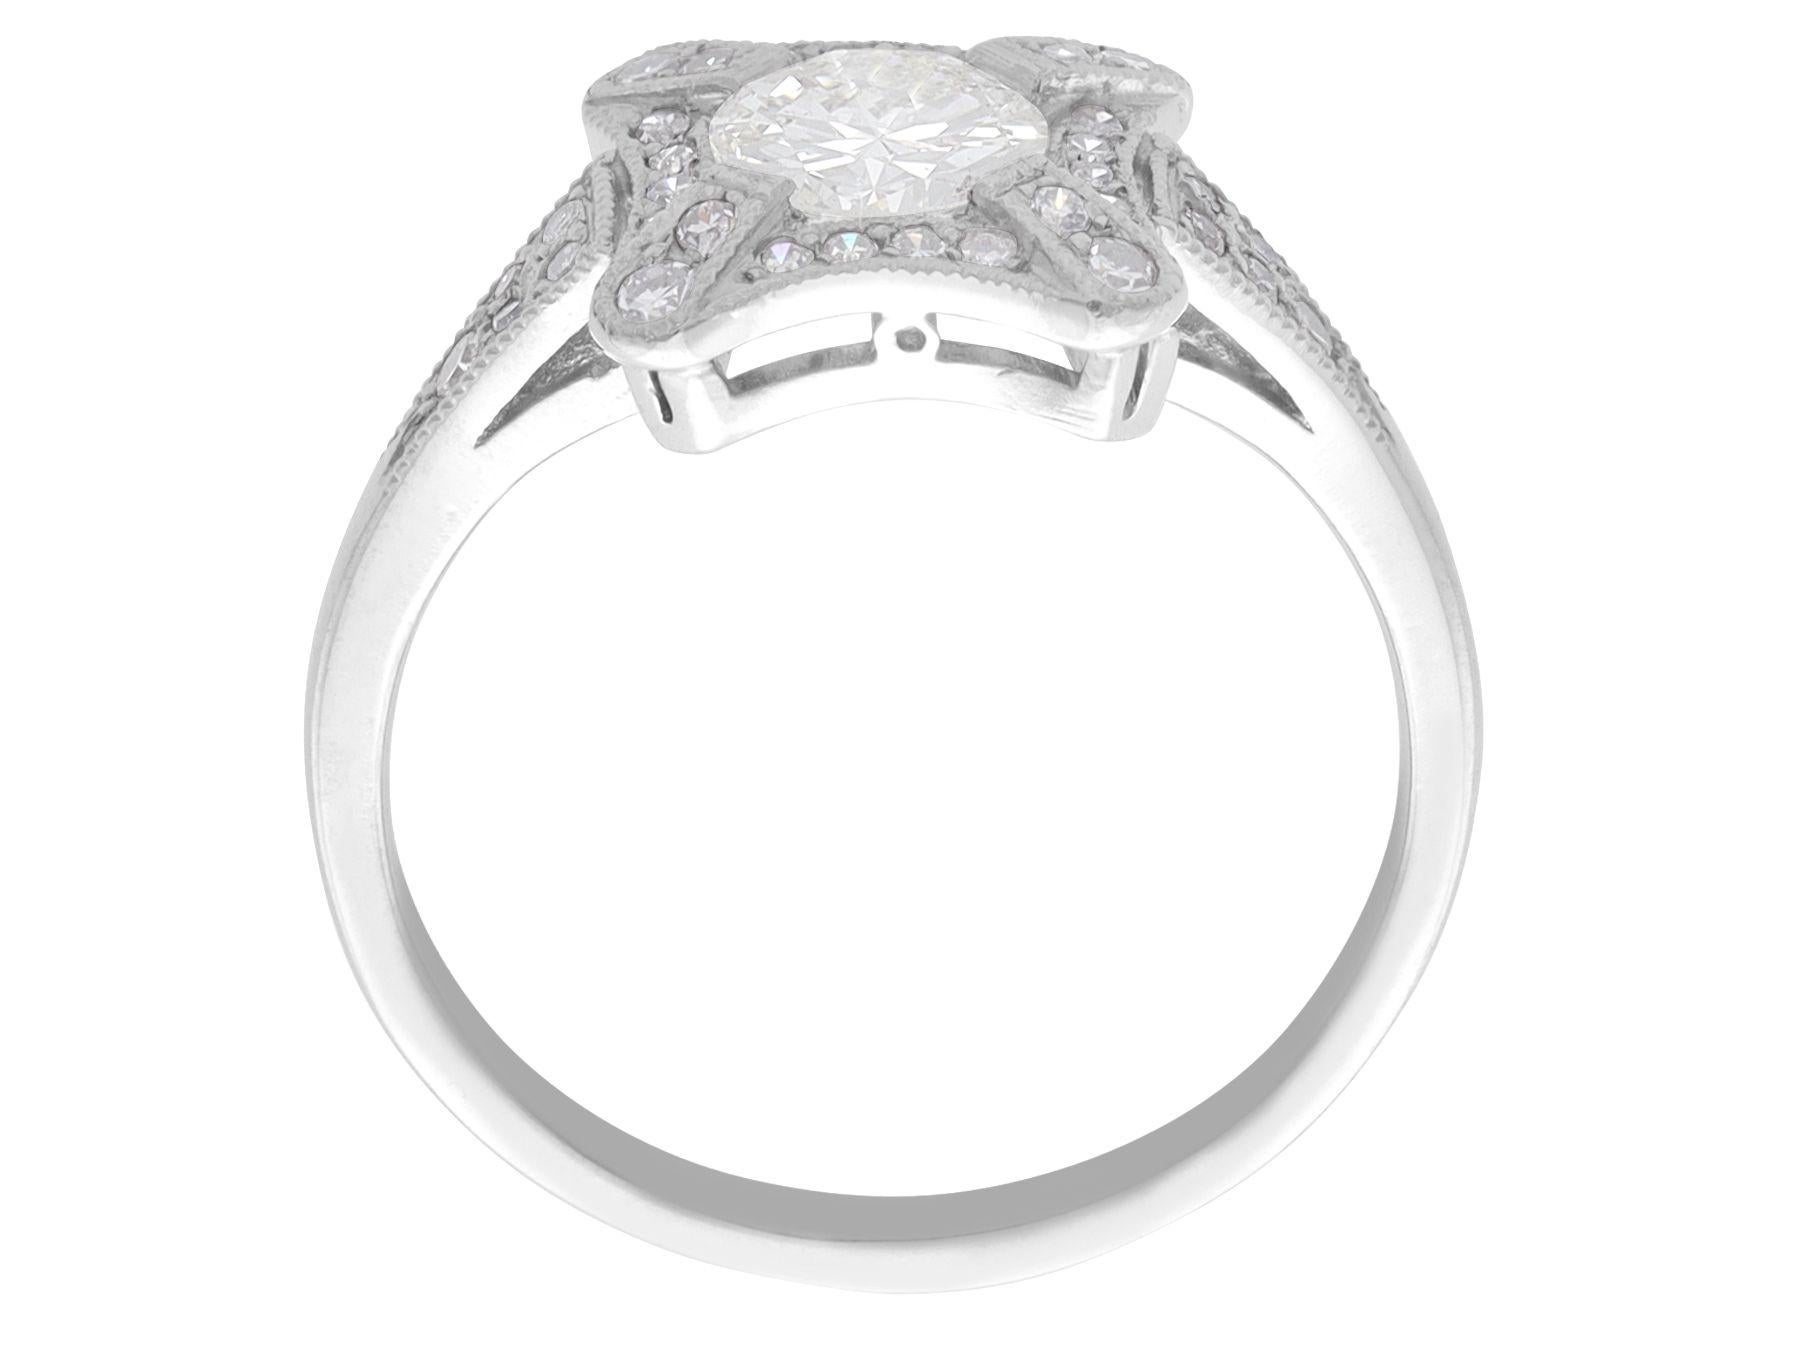 1.01 Carat Diamond and Platinum Cluster Ring In Excellent Condition For Sale In Jesmond, Newcastle Upon Tyne